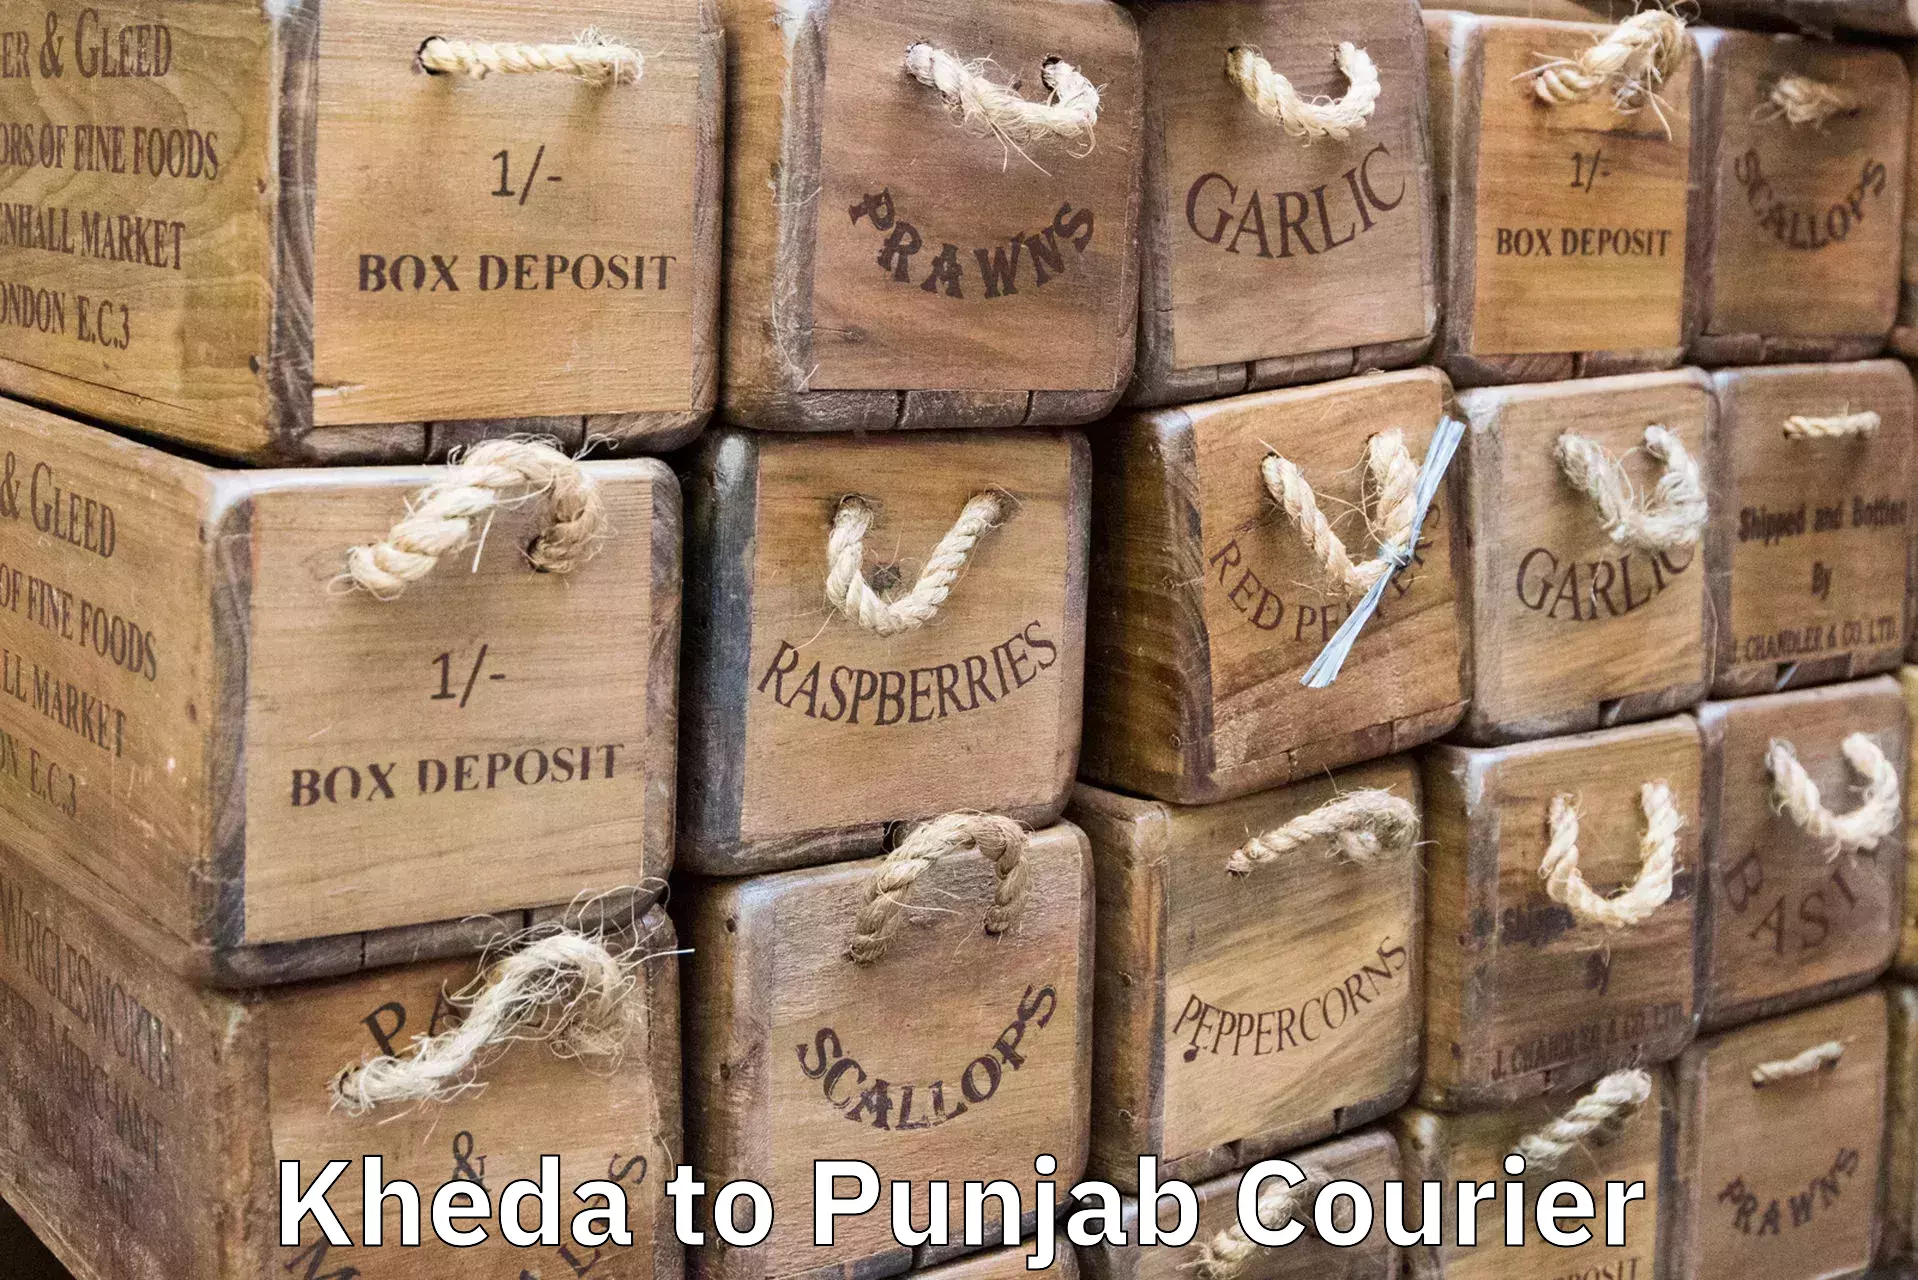 Luggage delivery app Kheda to Faridkot